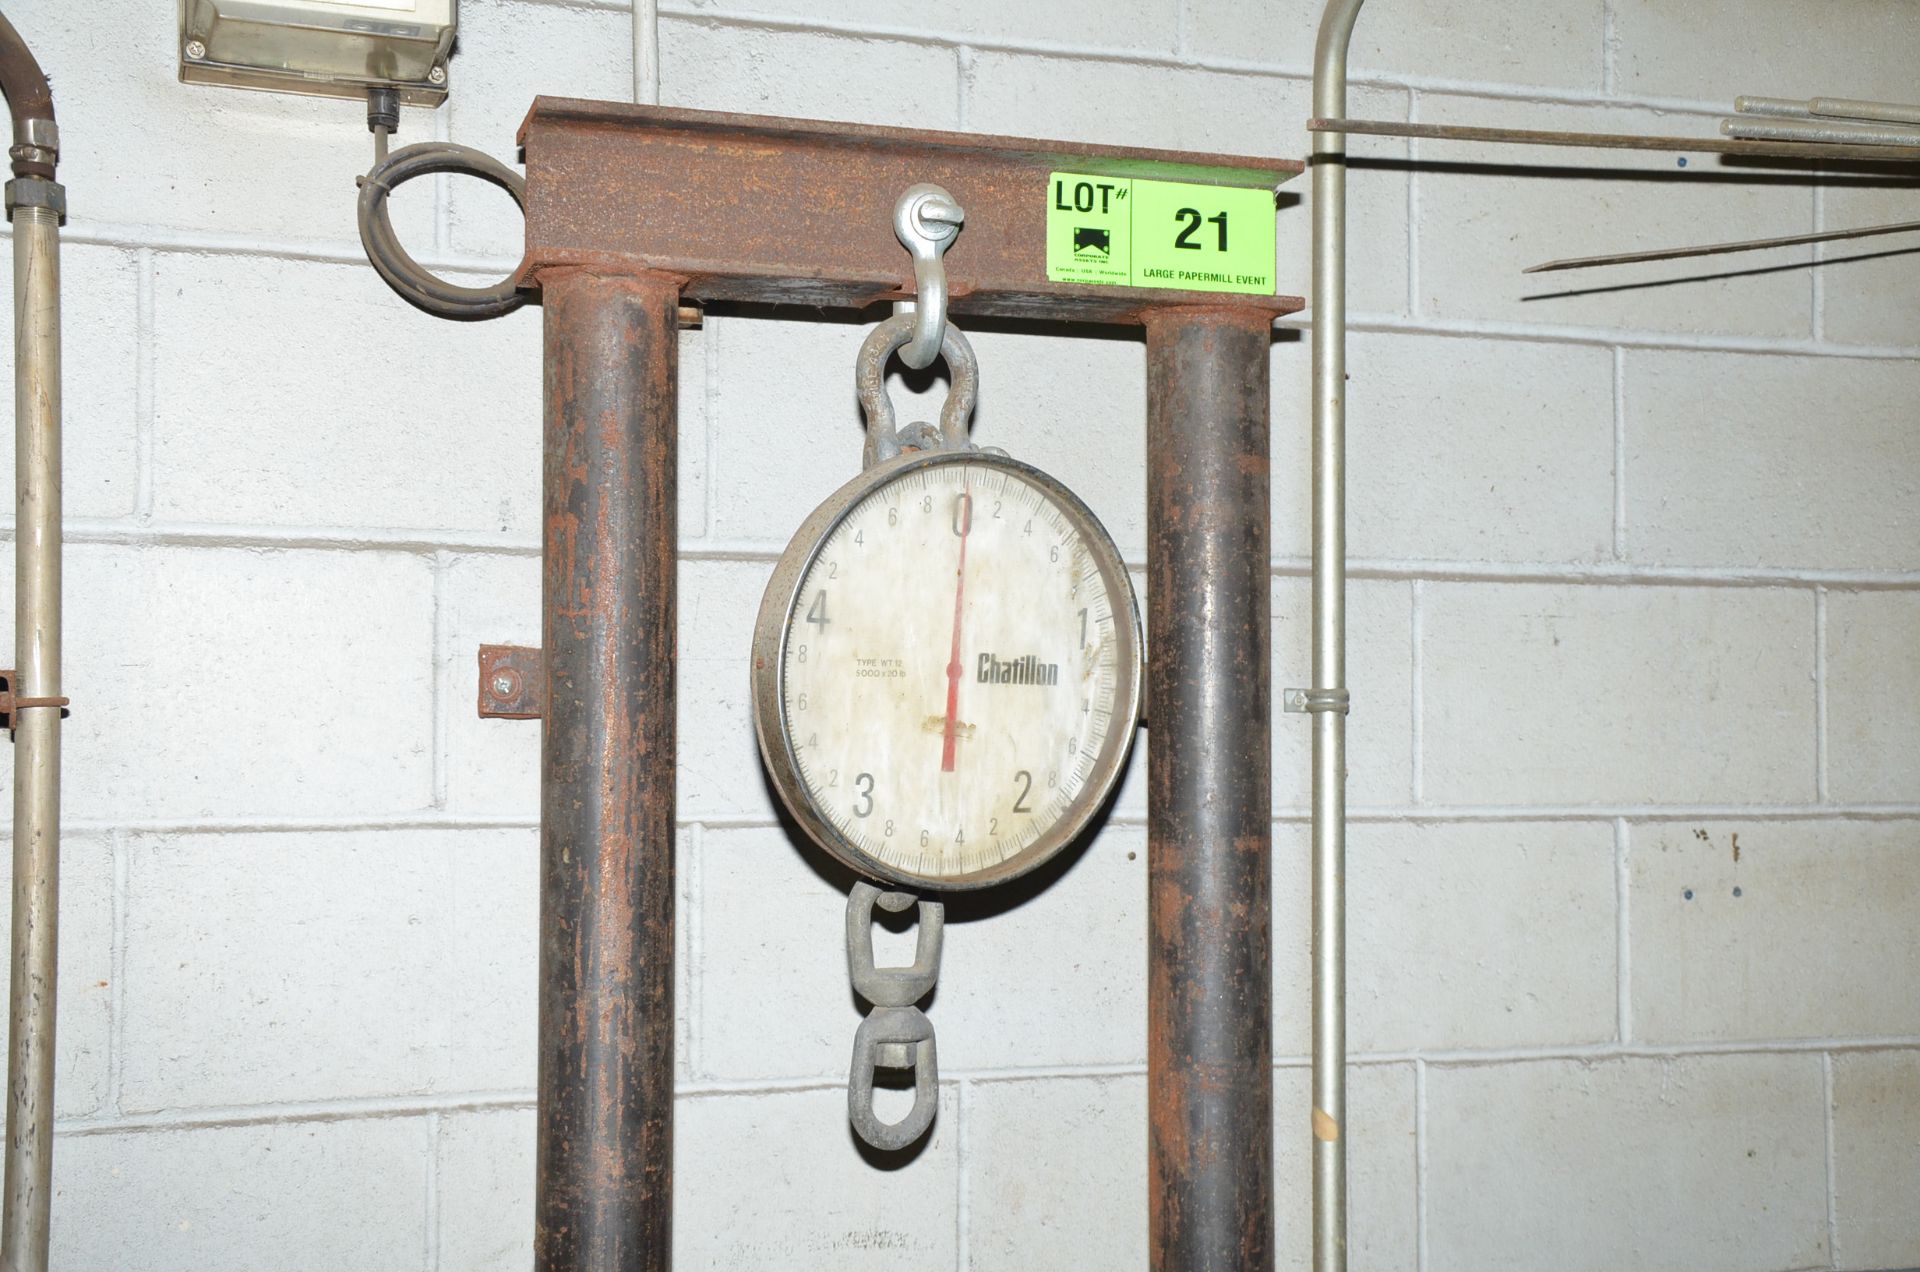 CHATILLON 5000X20LBS CRANE SCALE, S/N: N/A [RIGGING FEES FOR LOT #21 - $85 USD PLUS APPLICABLE - Image 2 of 2